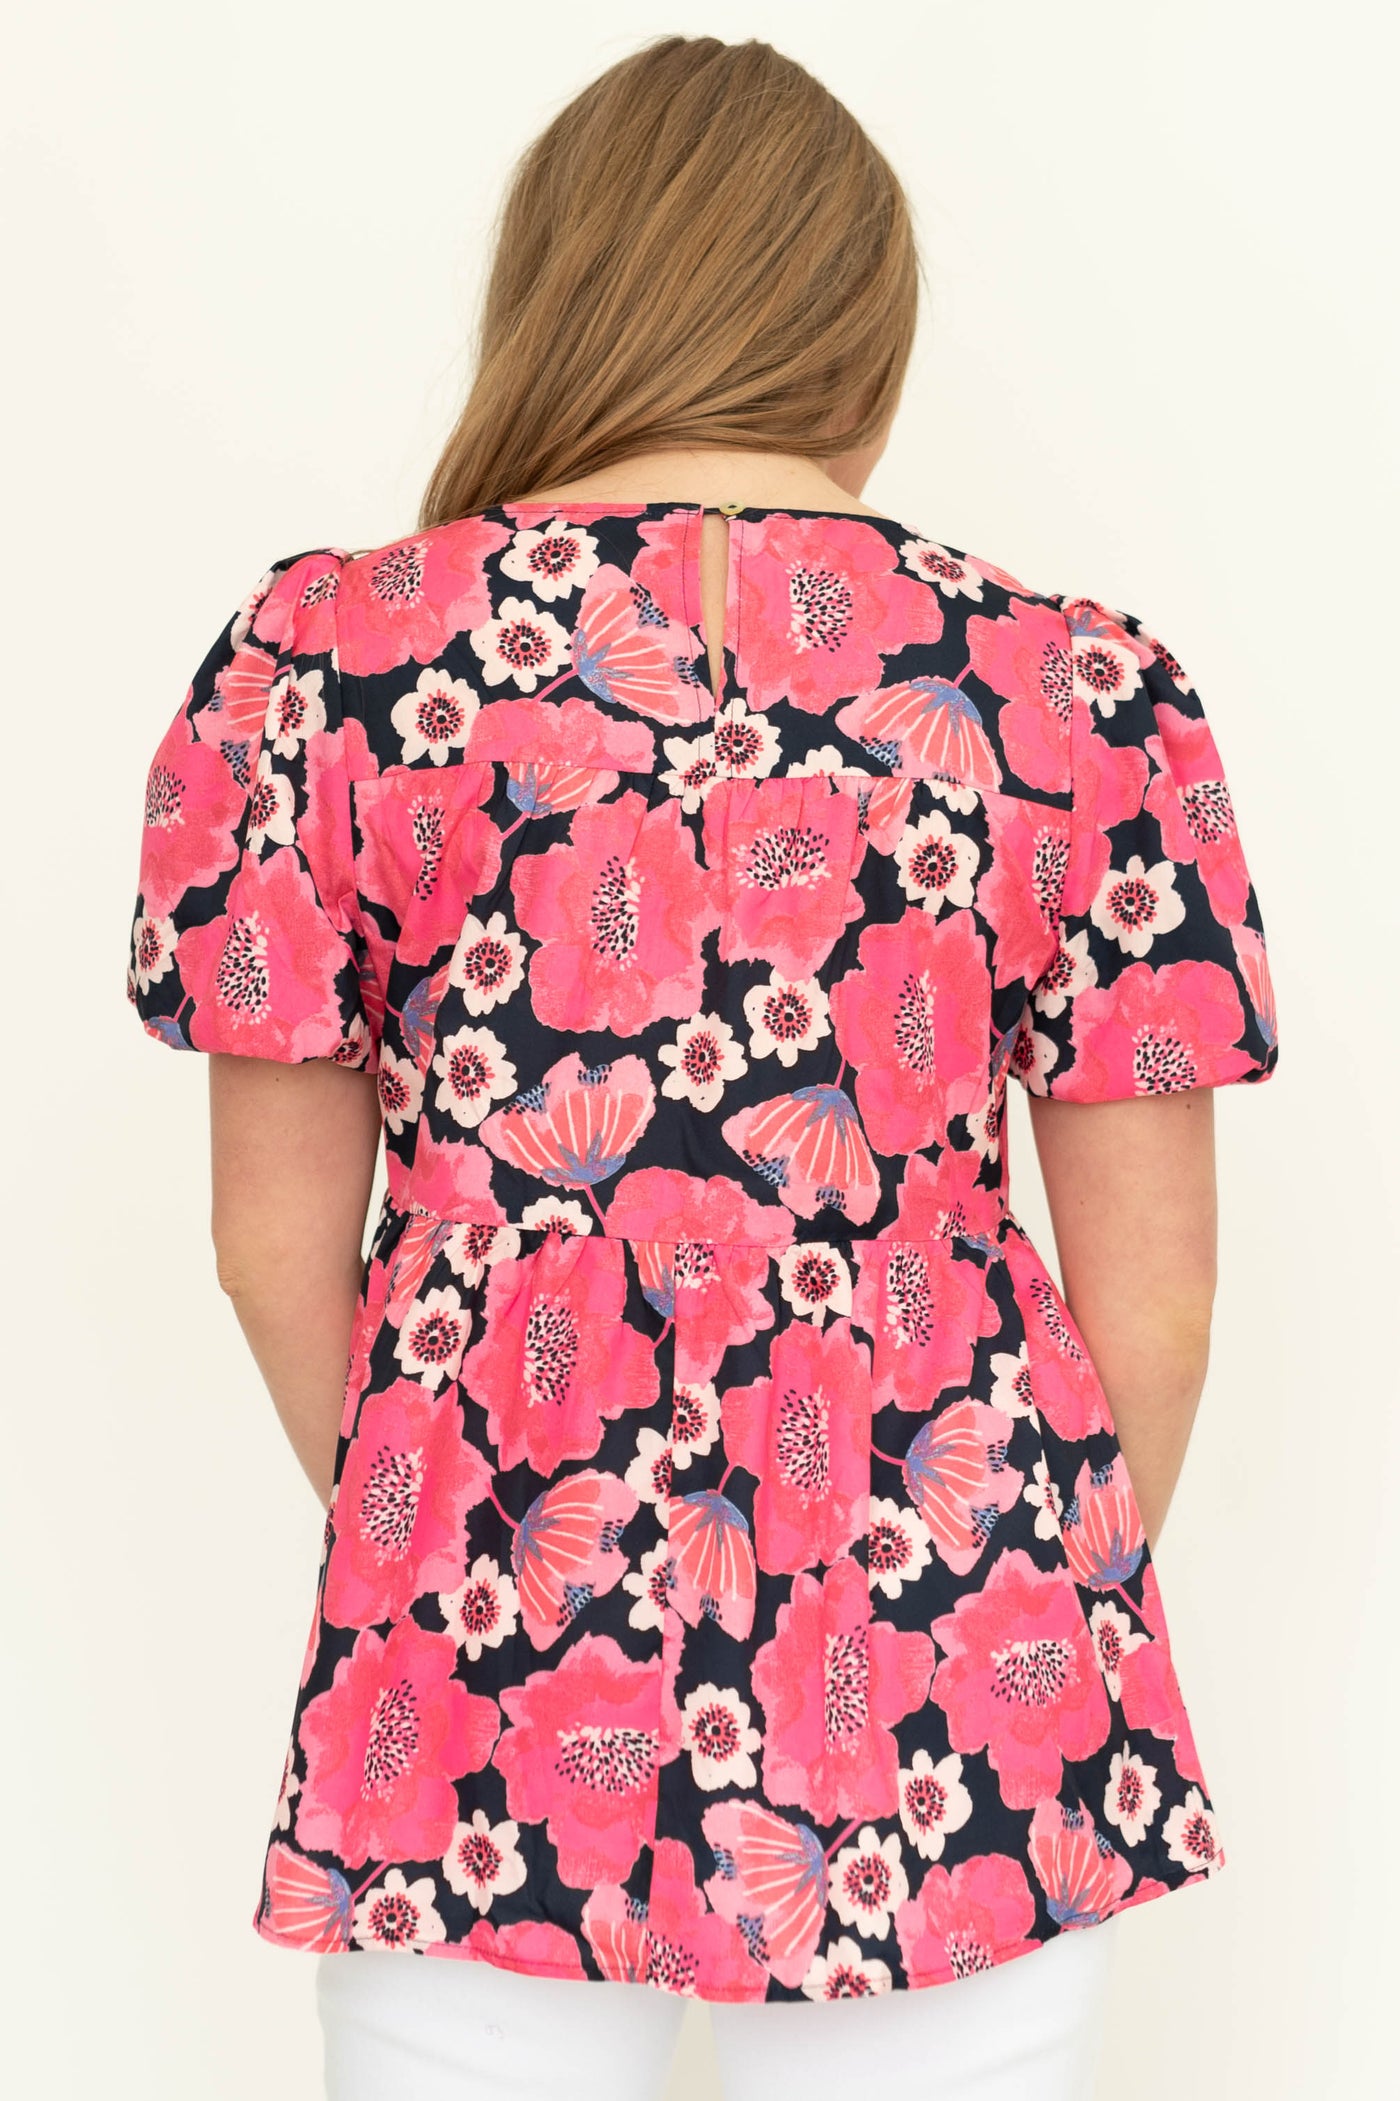 Back view of a short sleeve deep pink floral top.